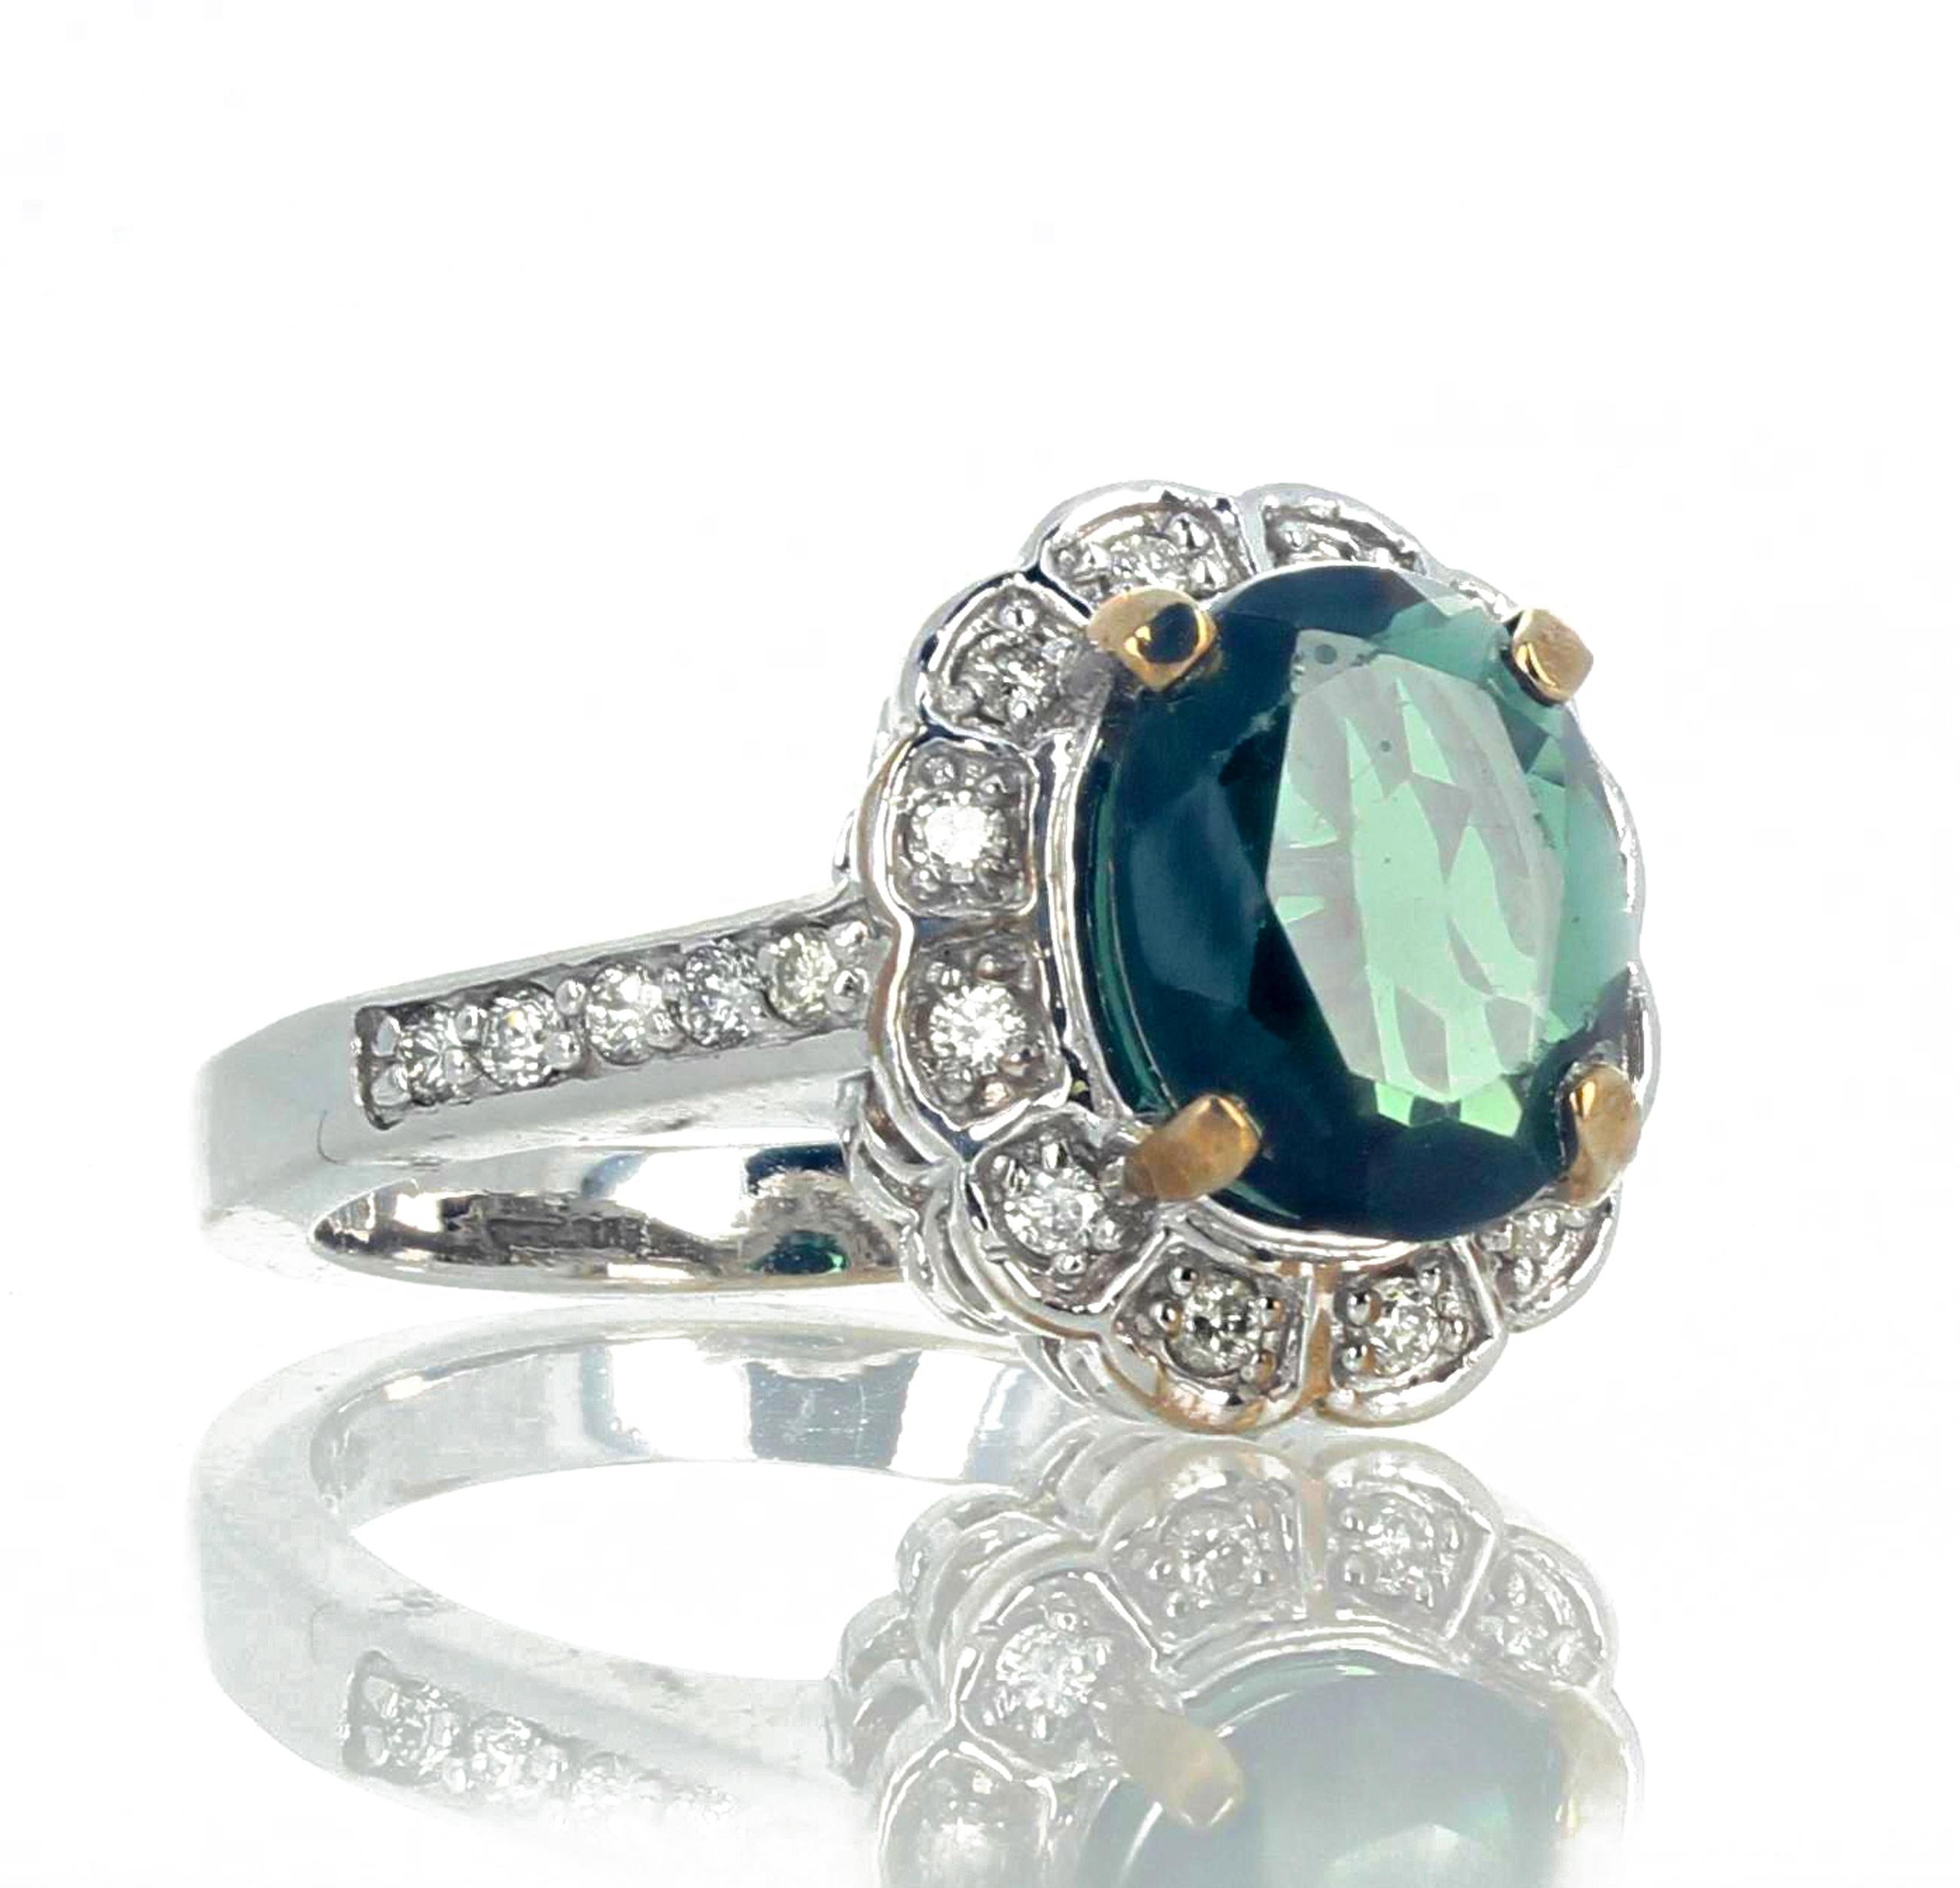 AJD Intensely Glowing 2.23 Ct Green Apatite & White Diamonds Ring For Sale 6